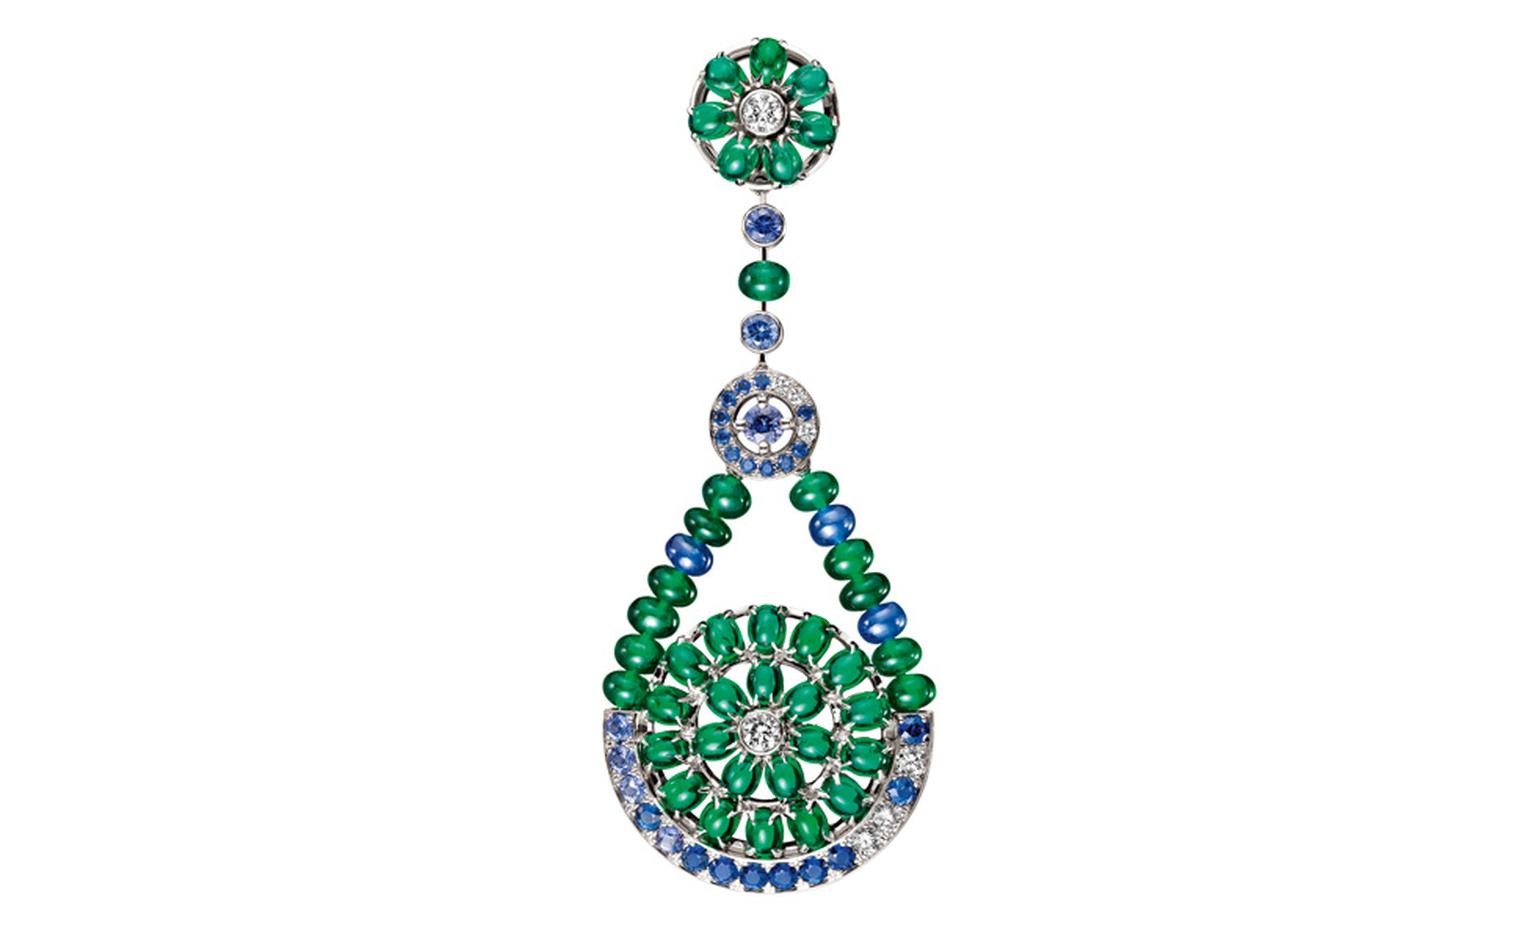 Boucheron Capriccioli  earrings,  paved  with  emerald  beads  and  sapphires,  oval  cabochon  emeralds,  blue  and   purple  sapphires  and  diamonds,  on  white  gold. POA